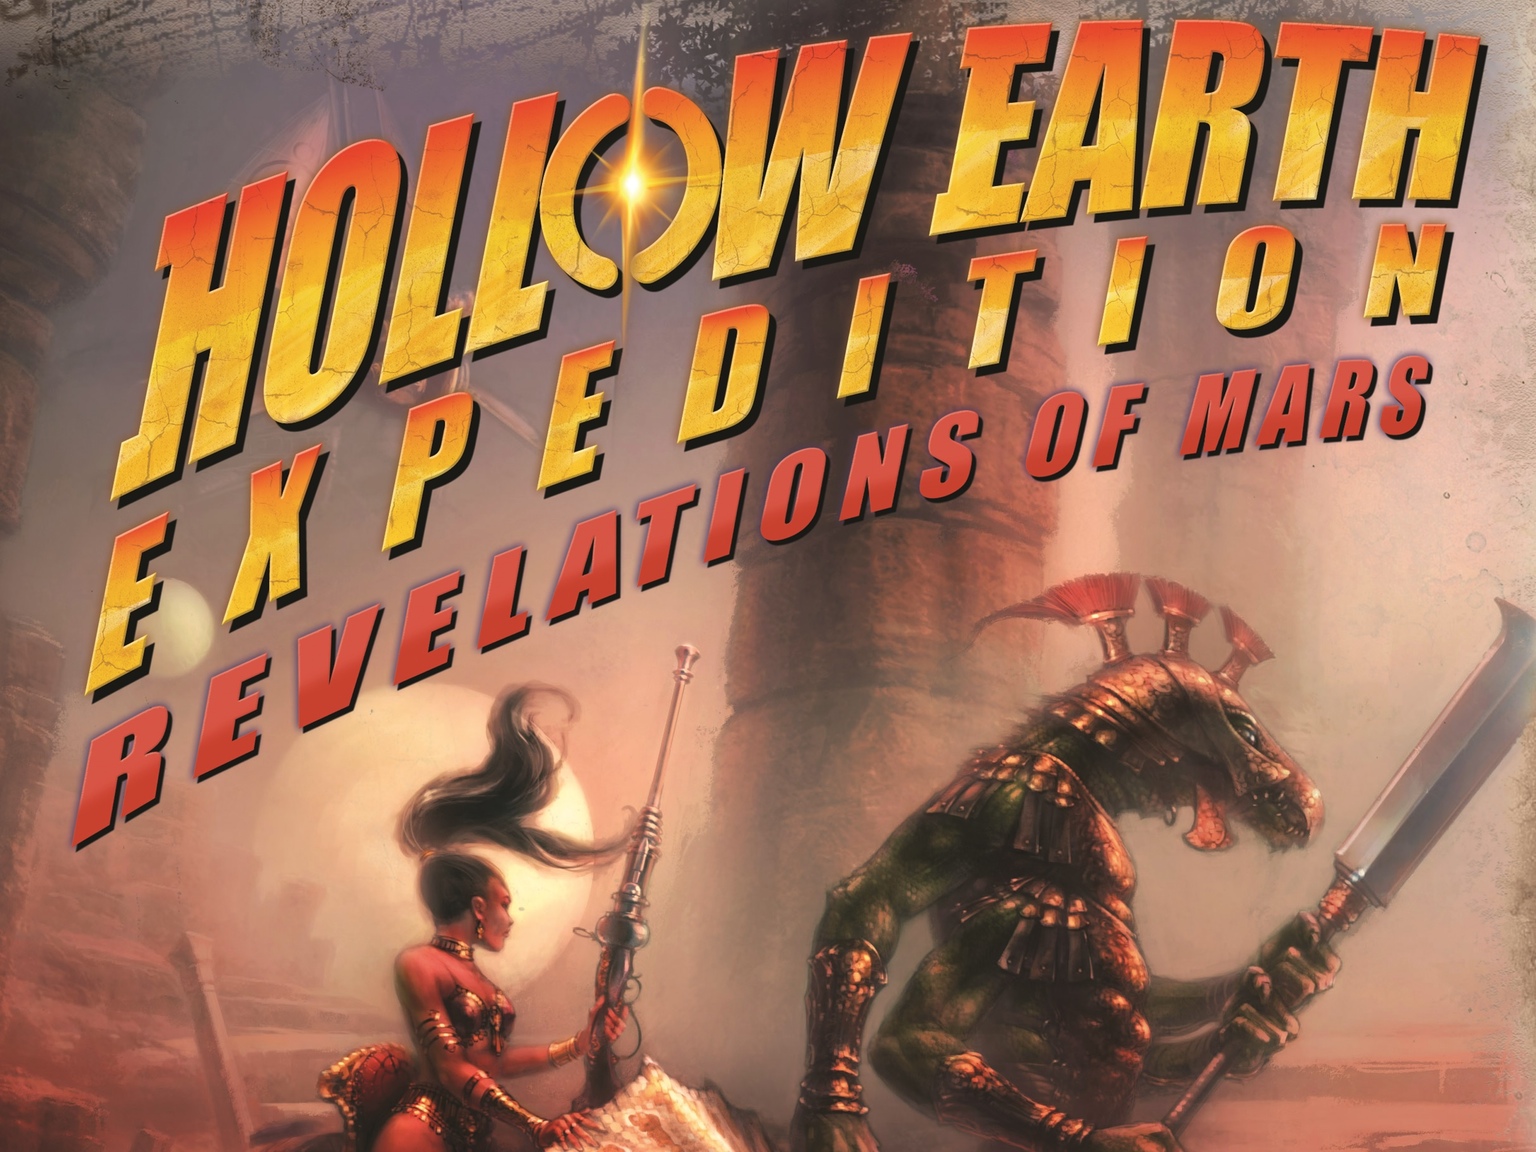 Hollow Earth Expedition Revelations of Mars logo